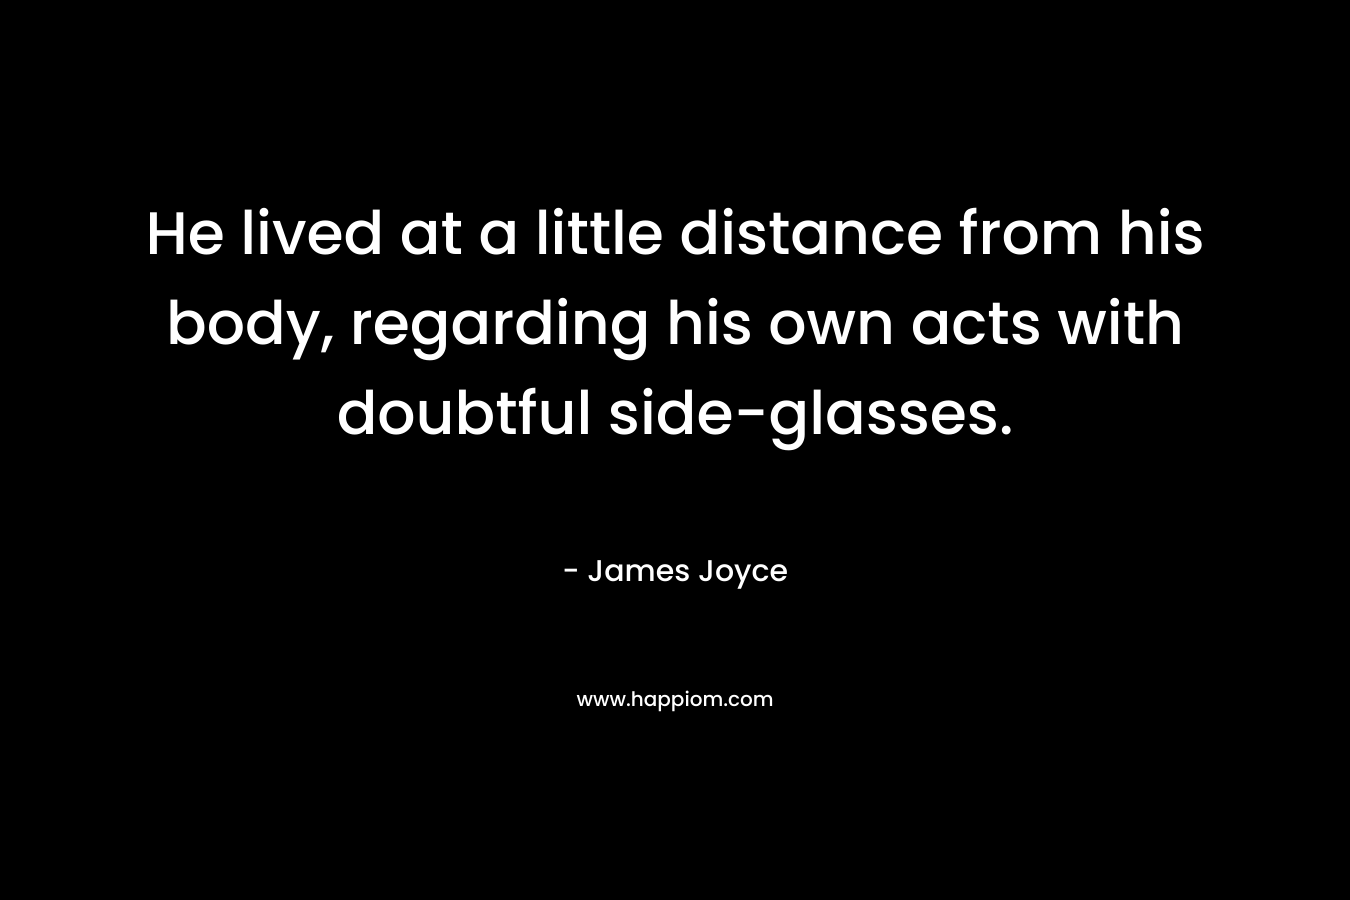 He lived at a little distance from his body, regarding his own acts with doubtful side-glasses. – James Joyce